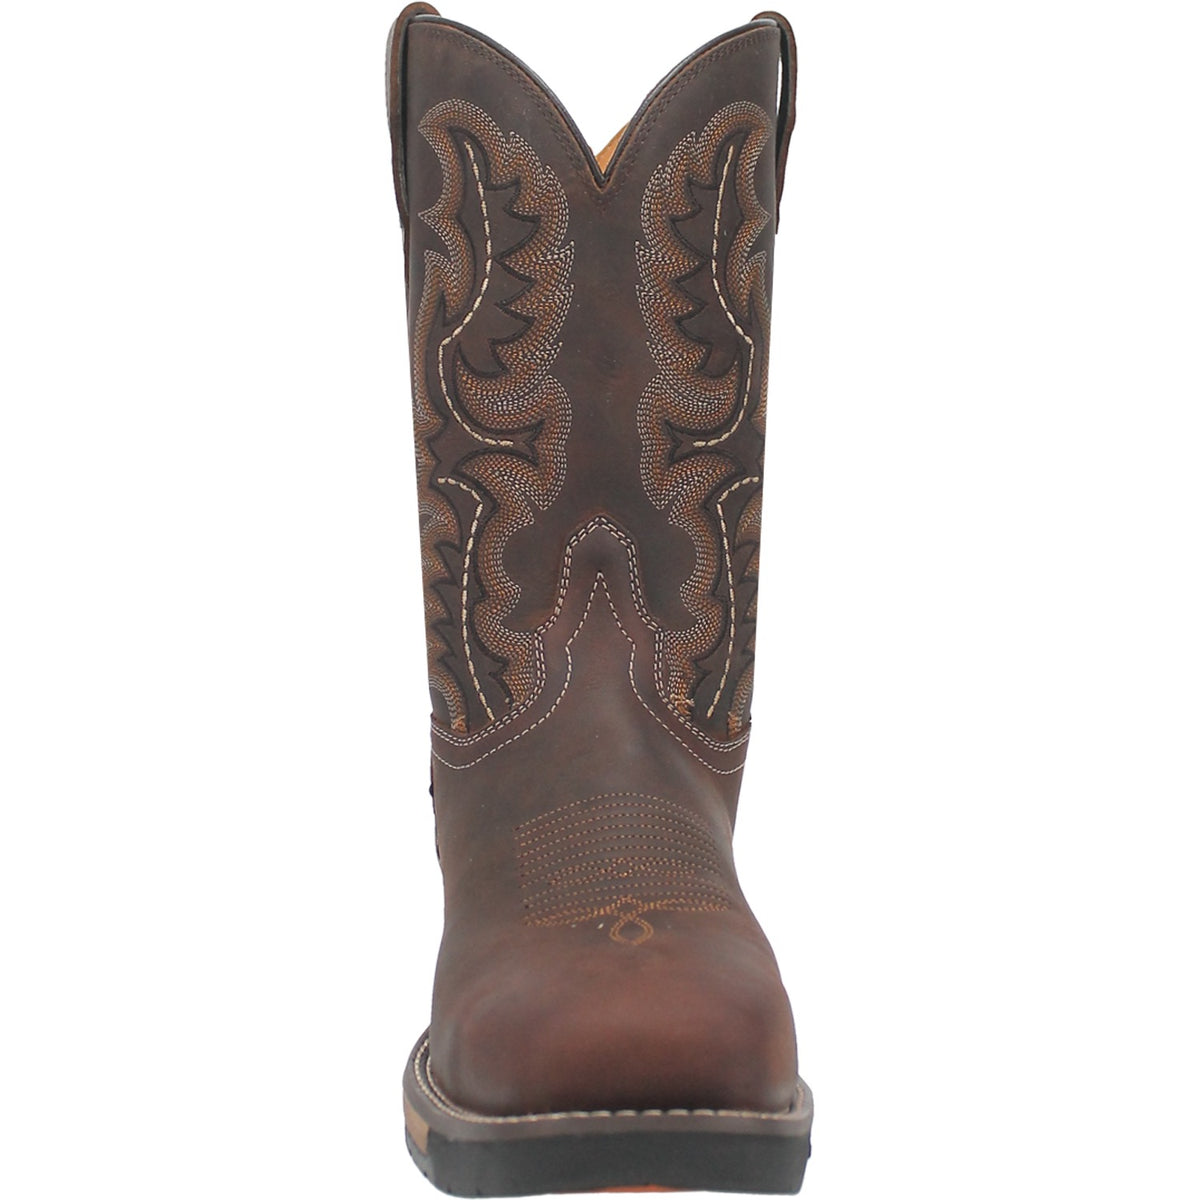 STRINGFELLOW STEEL TOE LEATHER BOOT Cover